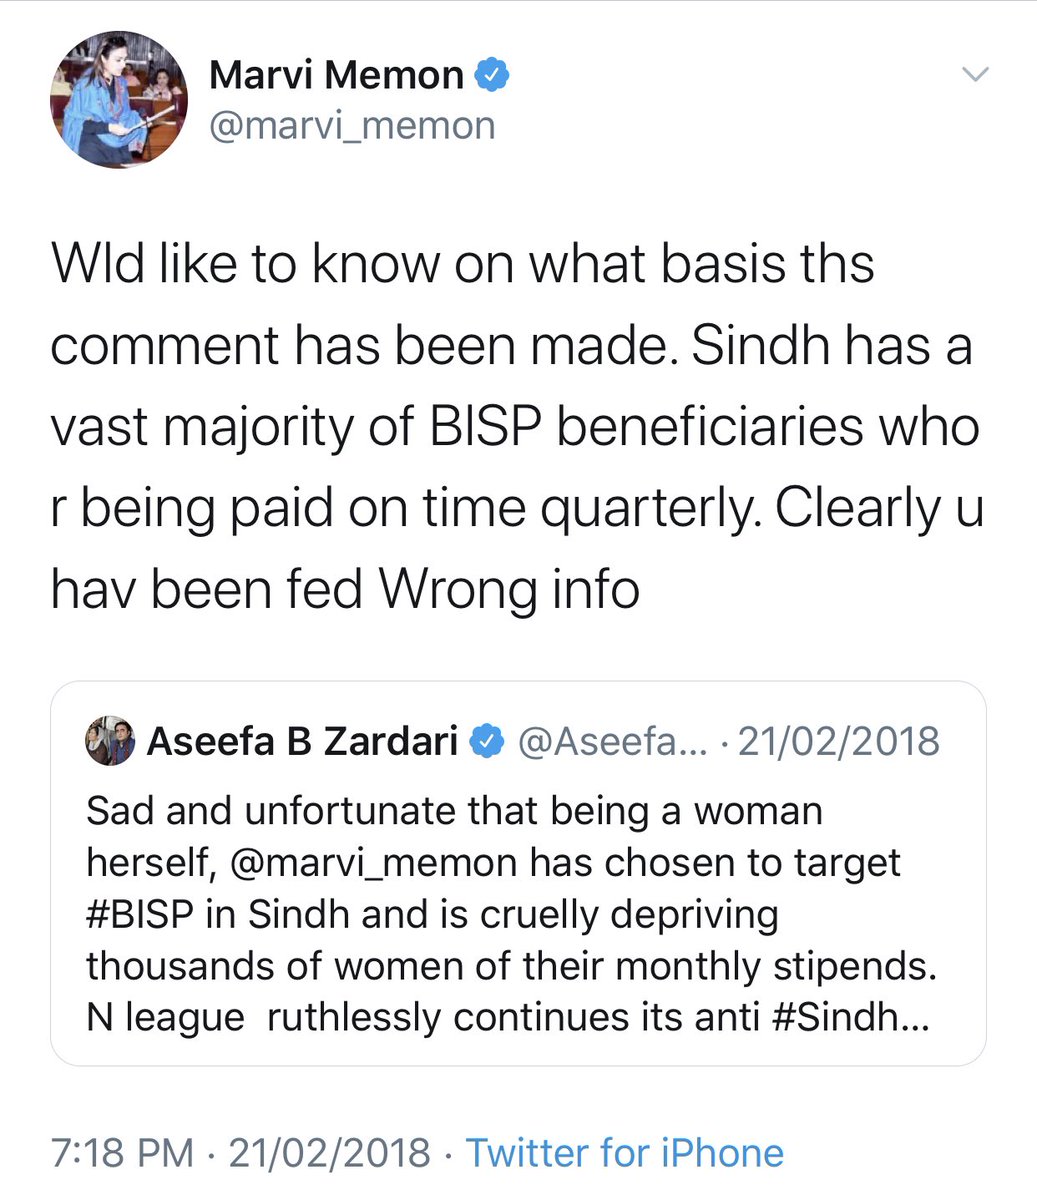  @AseefaBZ called Marvi’s bluff while the latter reacted but in reality In 2015 125,714 ghost BISP beneficiaries with majority in Sindh were detected. Over the years till 2015, Rs 3.3 billion was given to these ghost beneficiaries,a clear indication of political engineering.